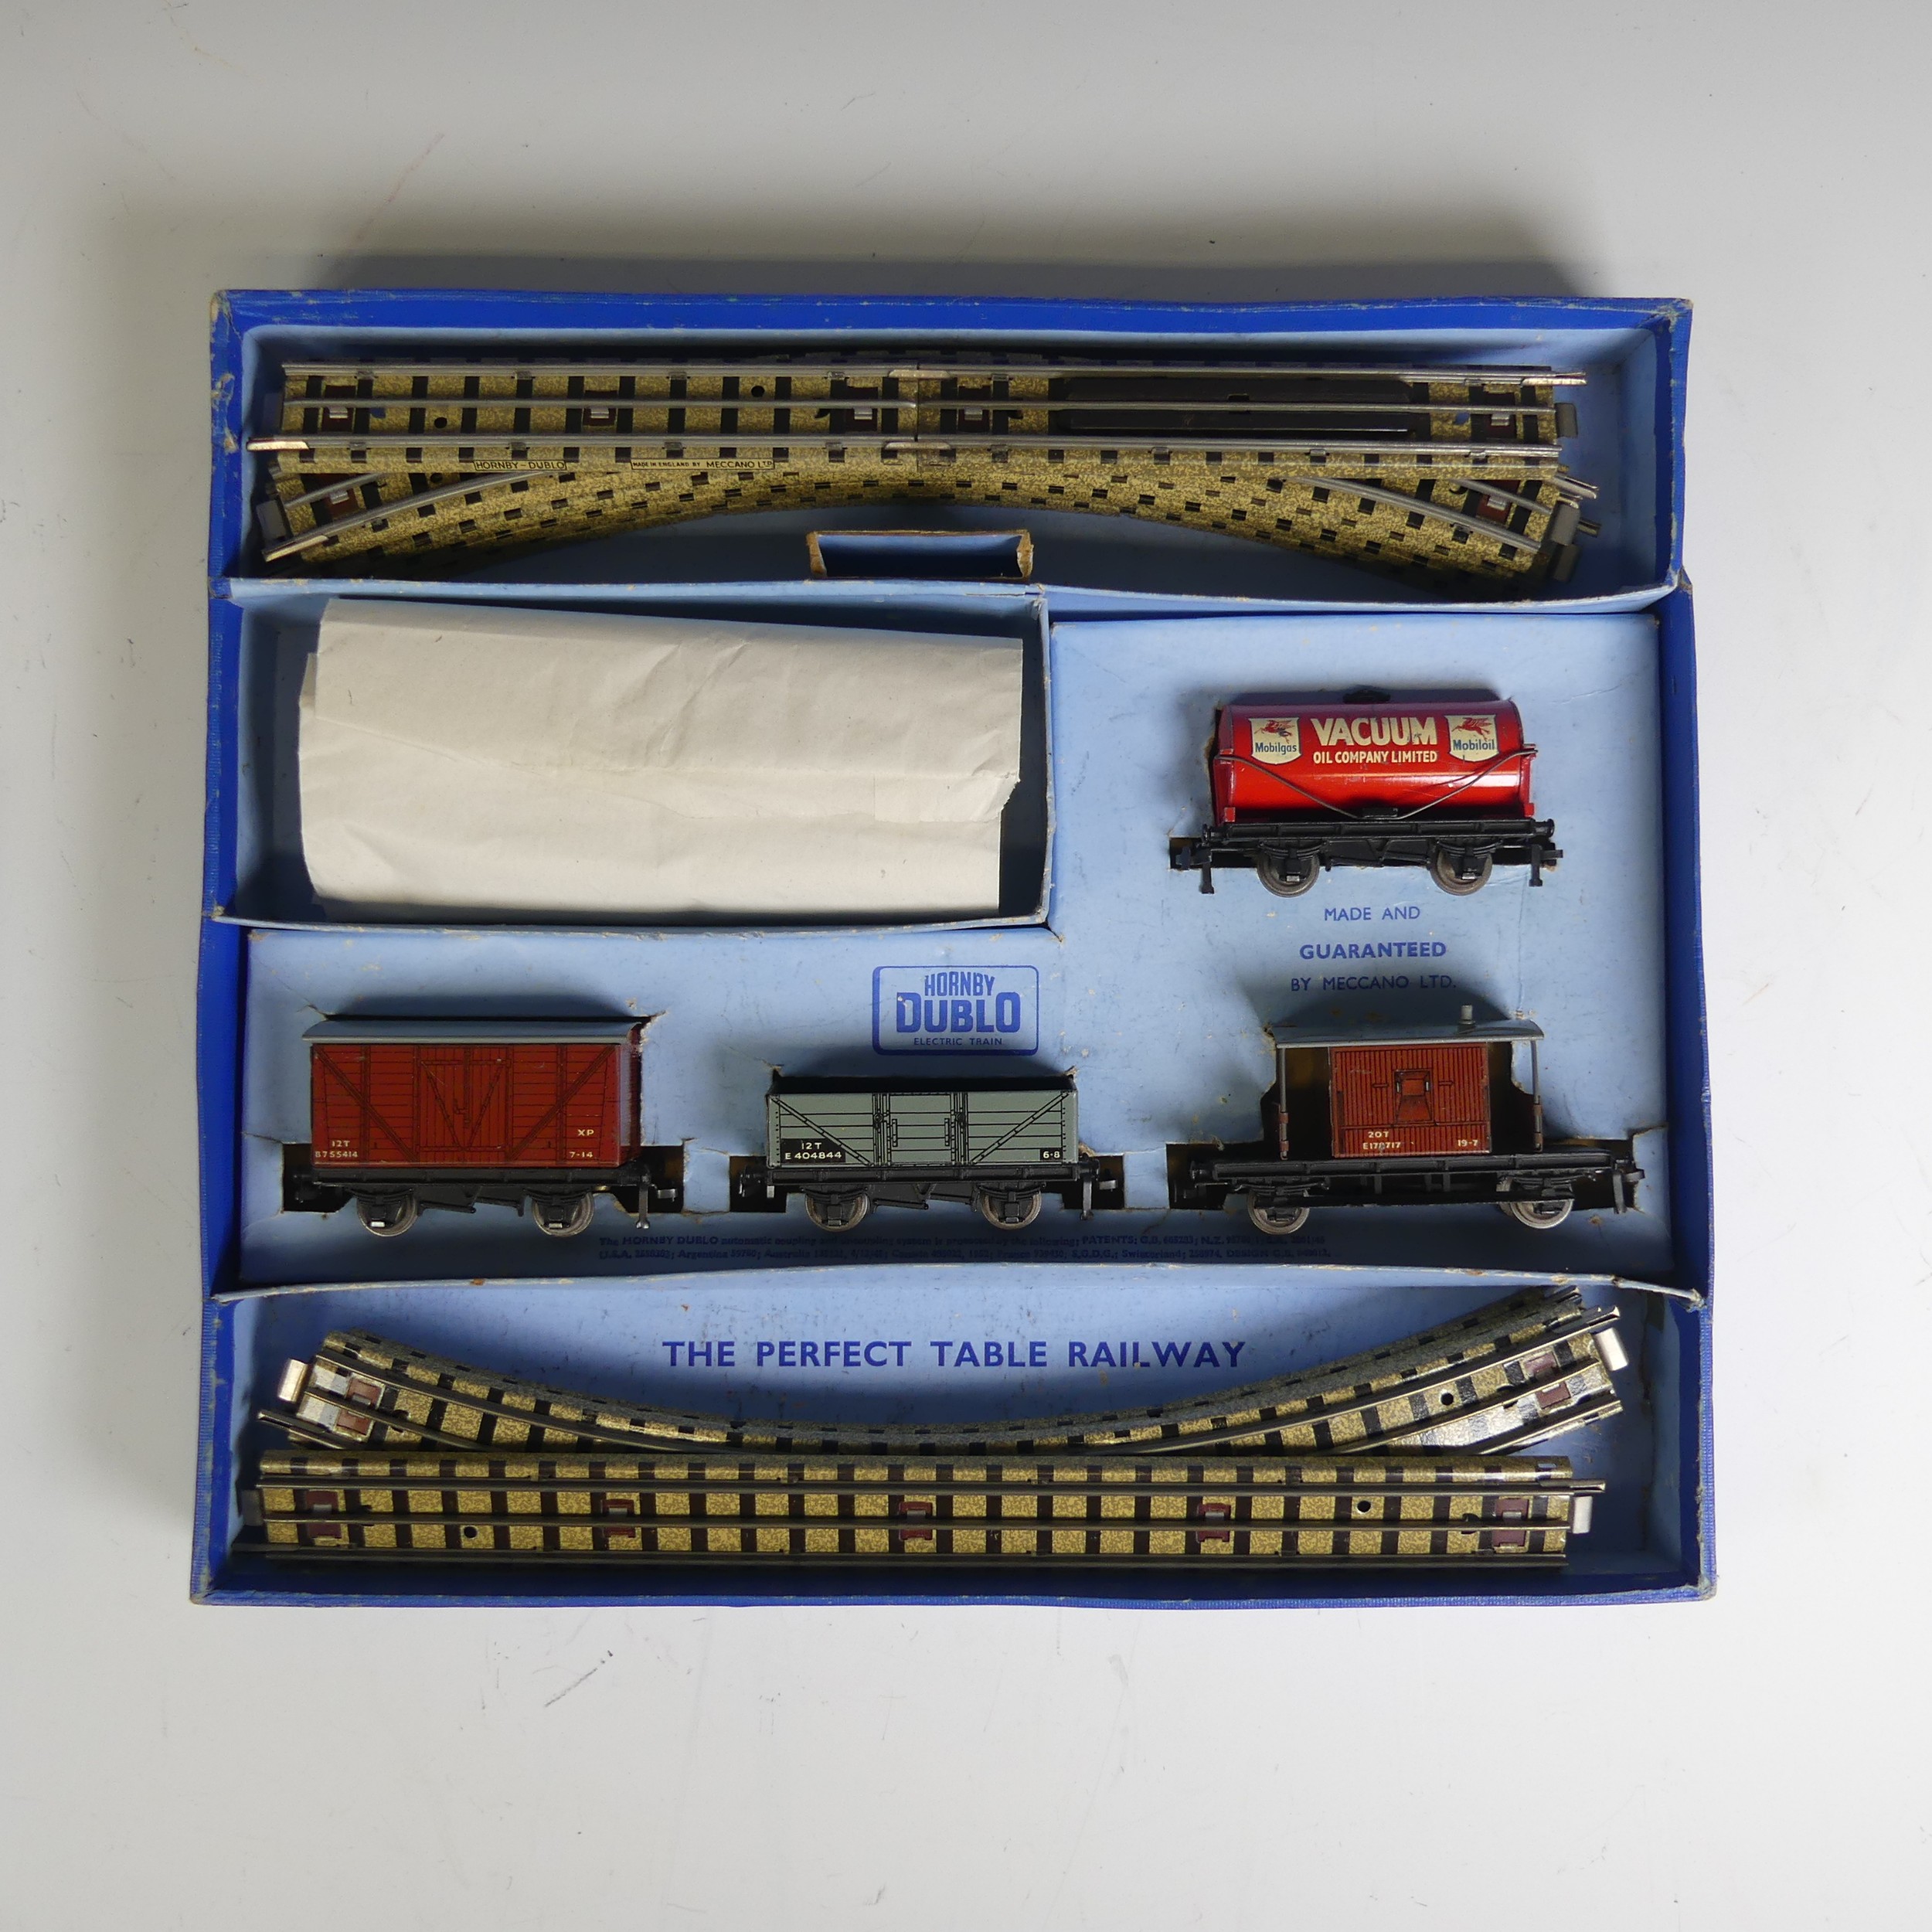 Hornby Dublo EDG17 3-Rail 0-6-2 Tank Goods Set, late version with the Vacuum Tanker, boxed. - Image 2 of 2